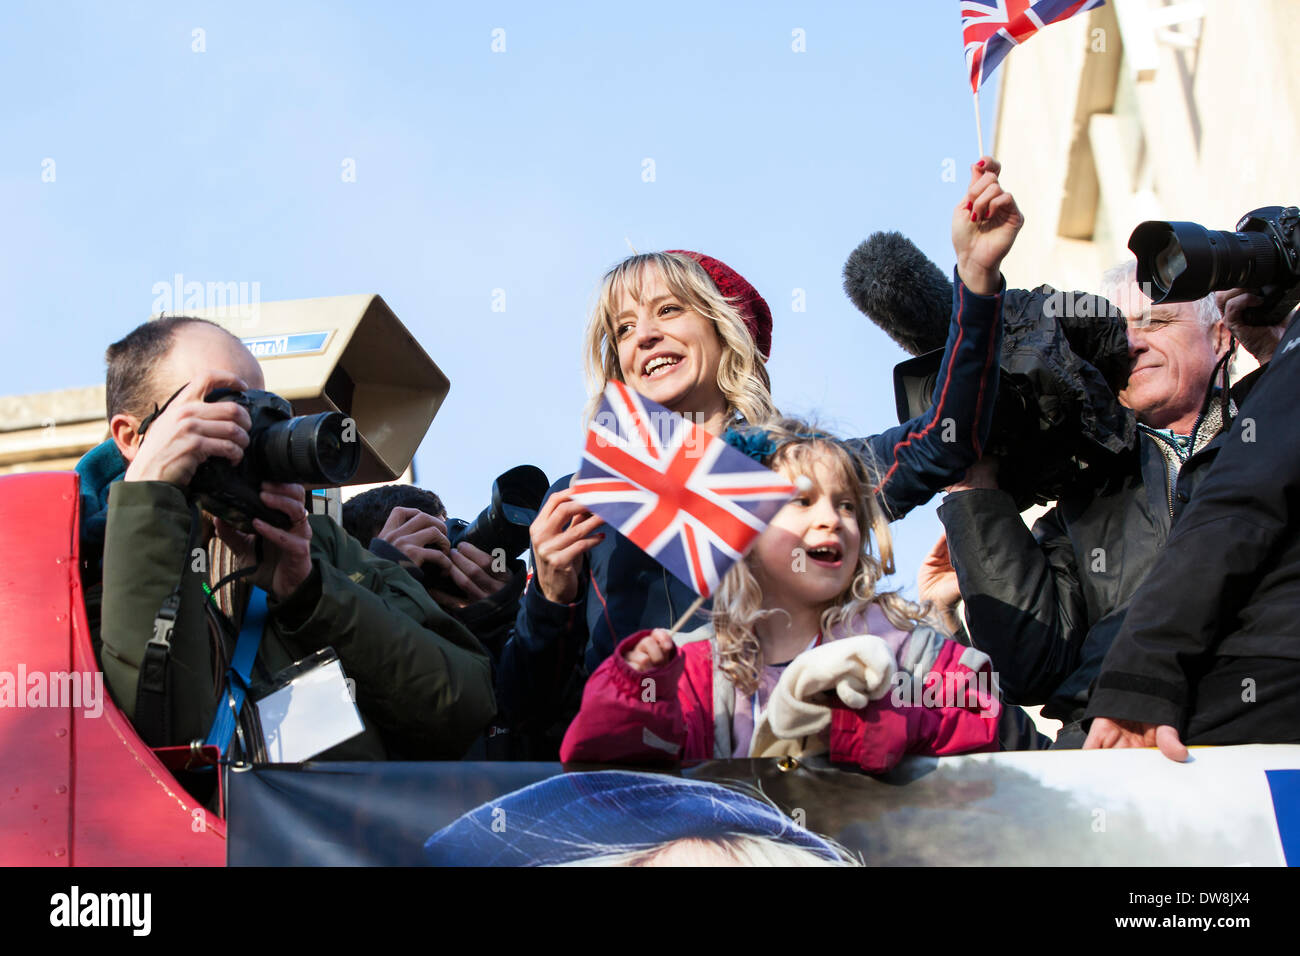 Bristol, UK. 3rd Mar, 2014. Snowboarder Jenny Jones toured through the streets of Bristol on an open top bus to celebrate her bronze medal win at the Sochi winter Olympics.  The bus went from her home area of Downend in South Gloucestershire to the Council Offices in Bristol city centre.  Afterwards she attended a reception in the council offices.  Supporters turned out along the route waving Union Jack flags in Bristol, March 3rd 2014. Credit:  Redorbital Photography/Alamy Live News Stock Photo